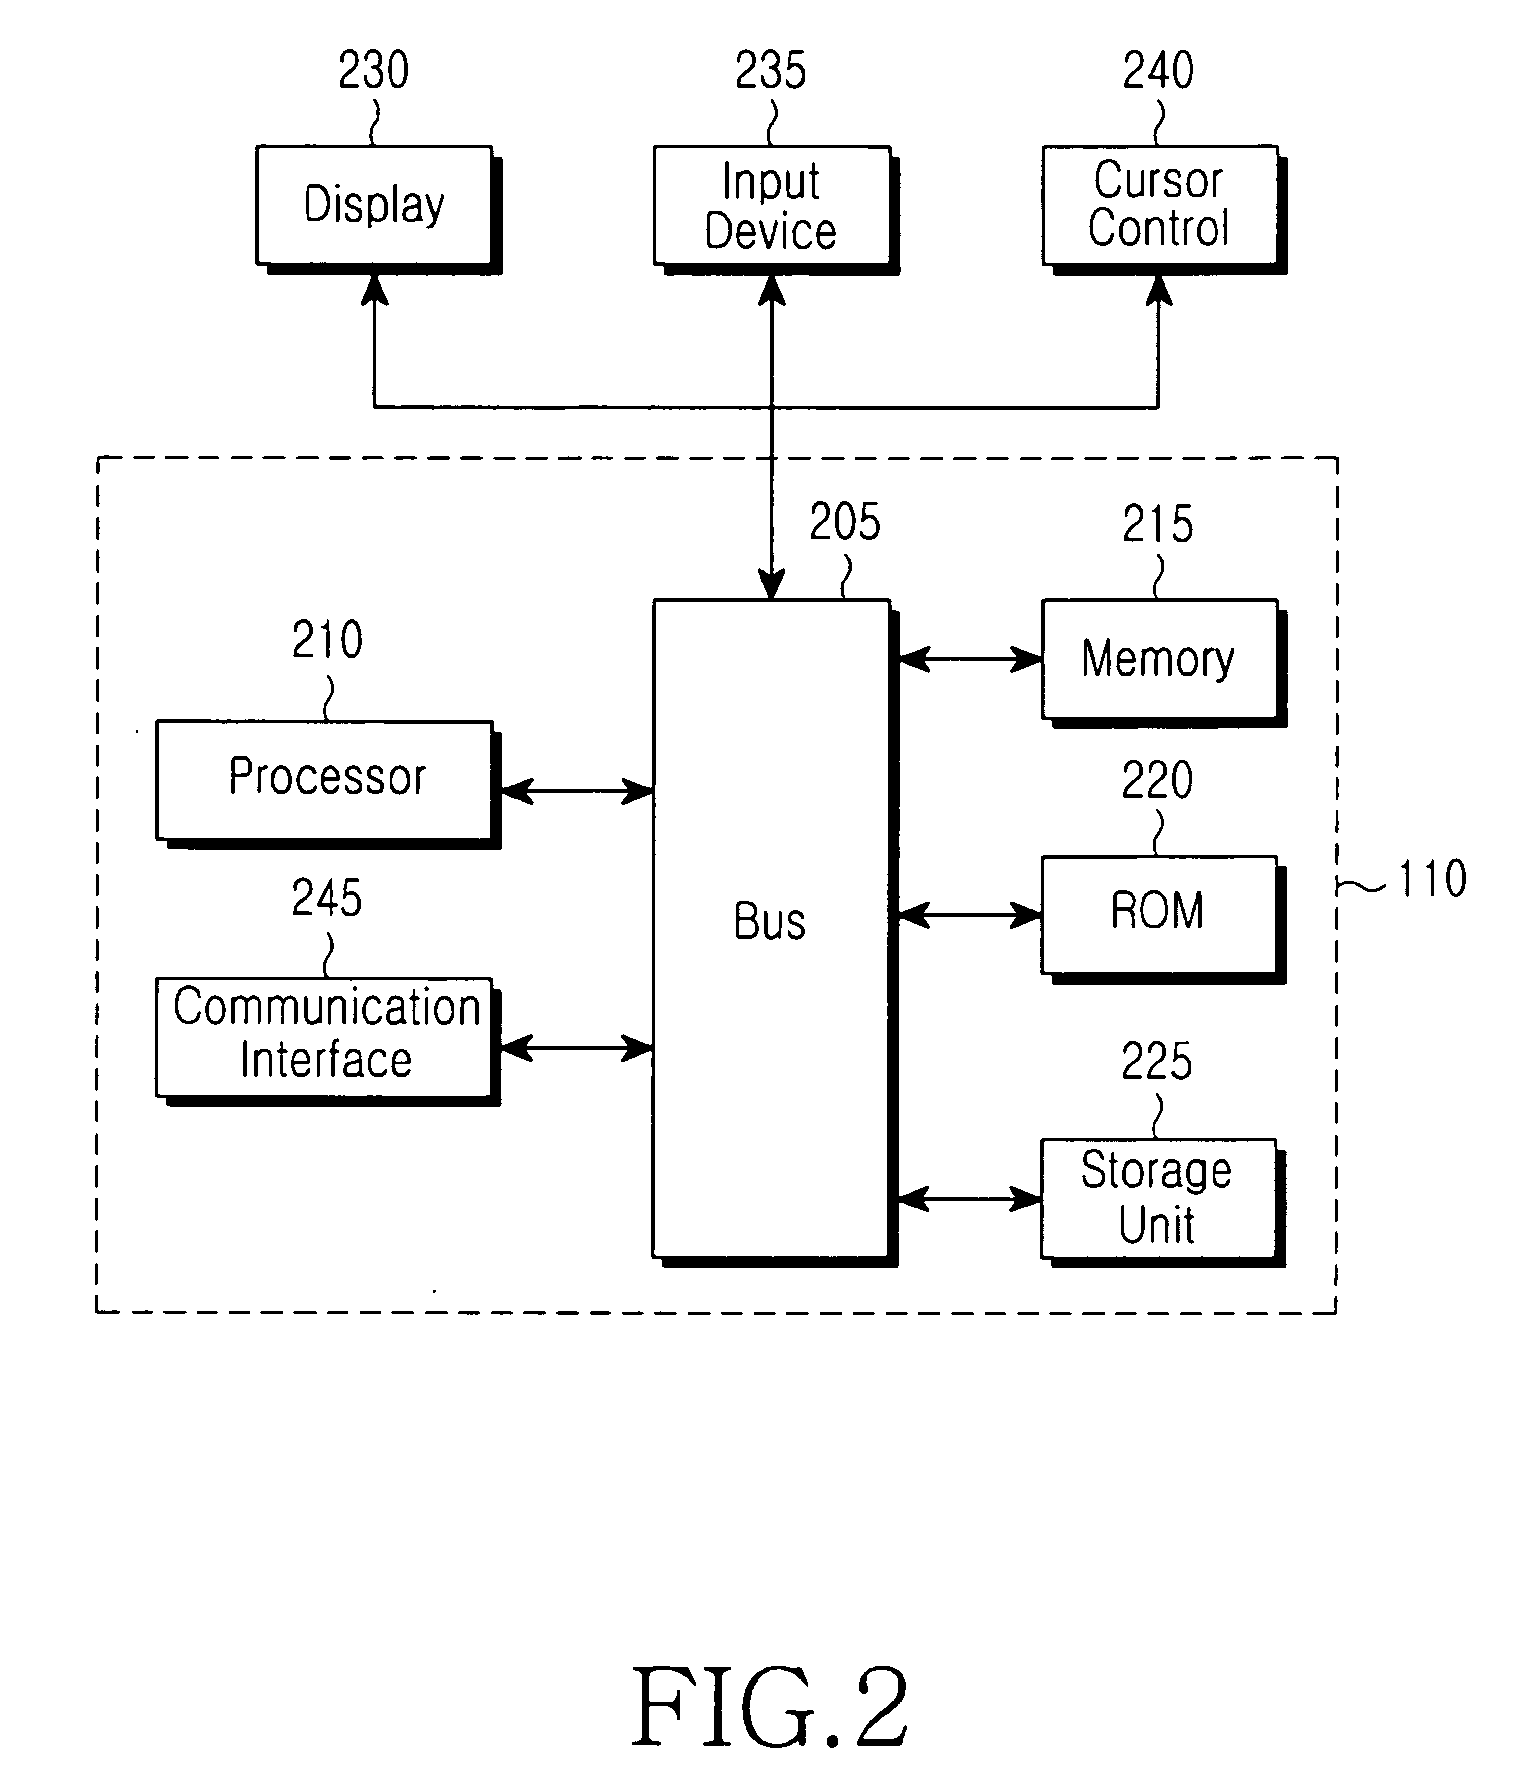 Method and system for managing an imaging device by an electronic device located remotely to the imaging device